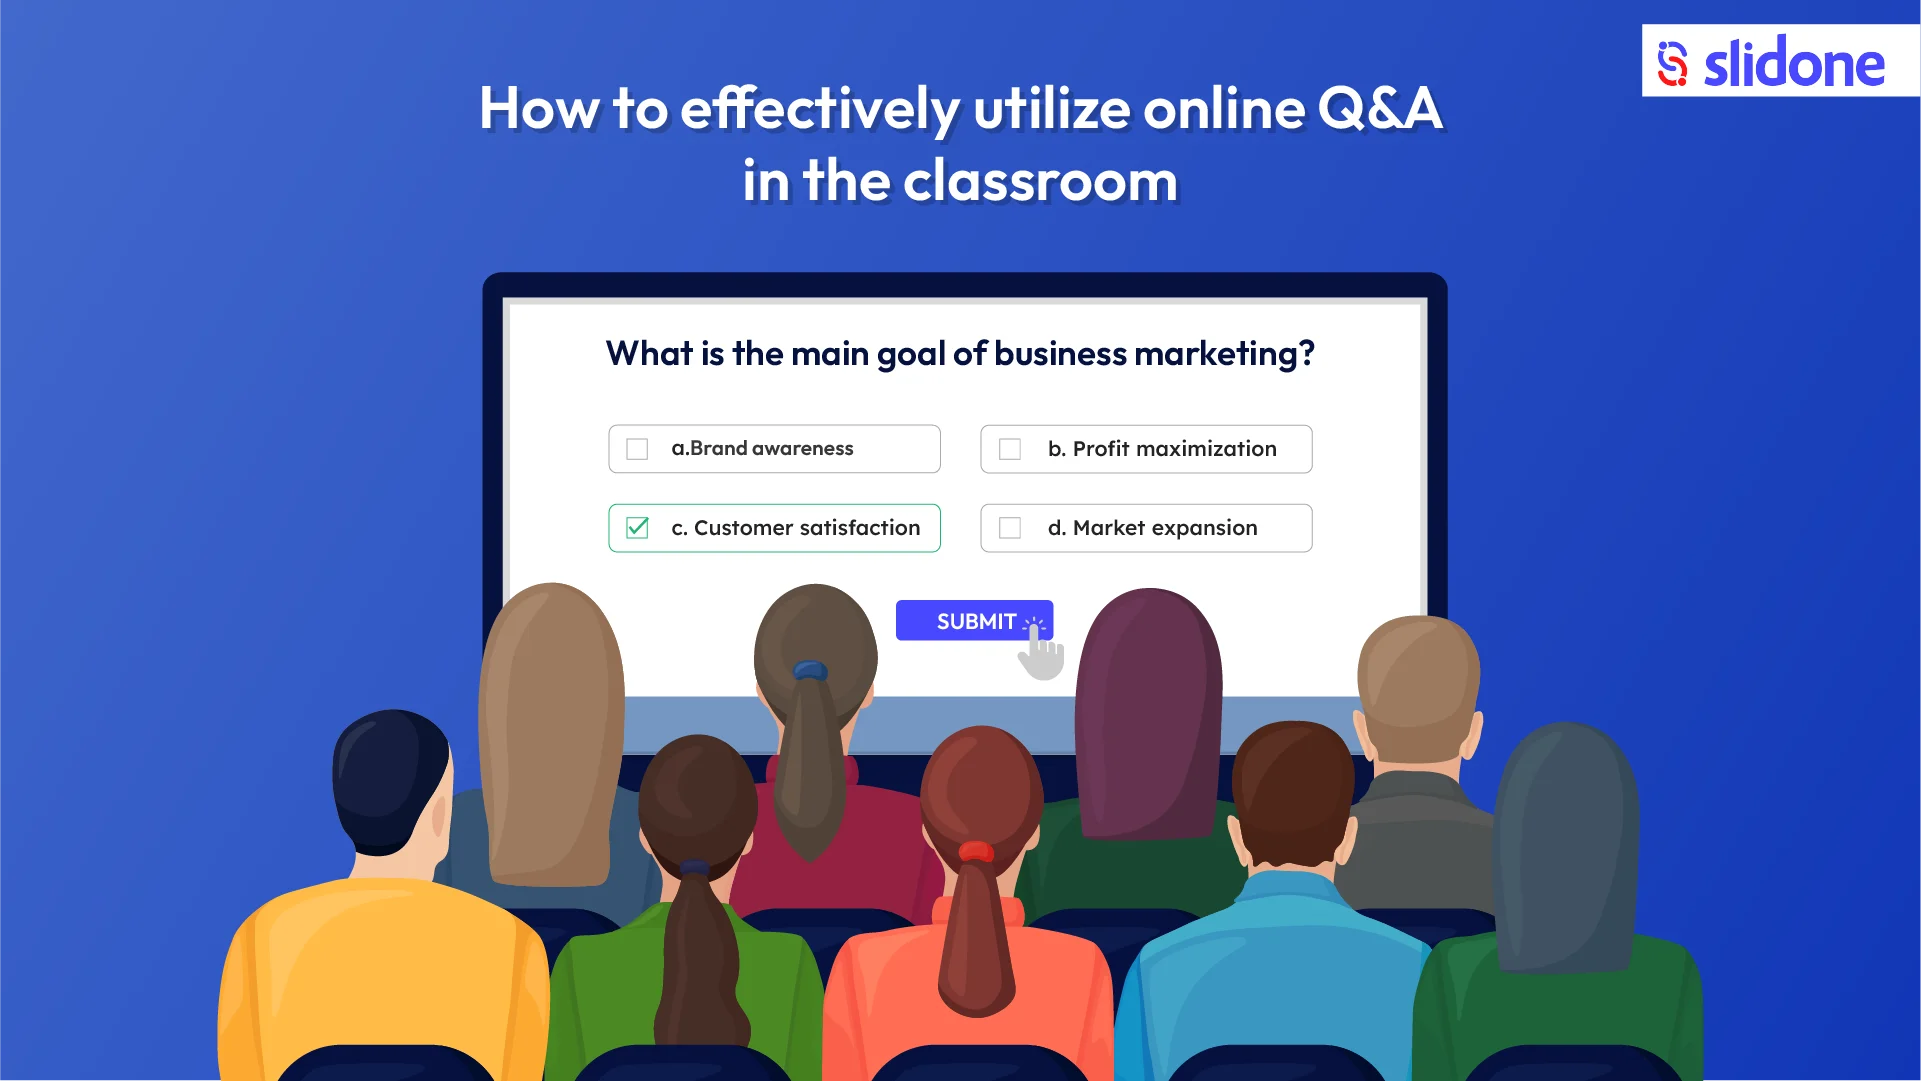 How to effectively utilize online Q&A in the classroom